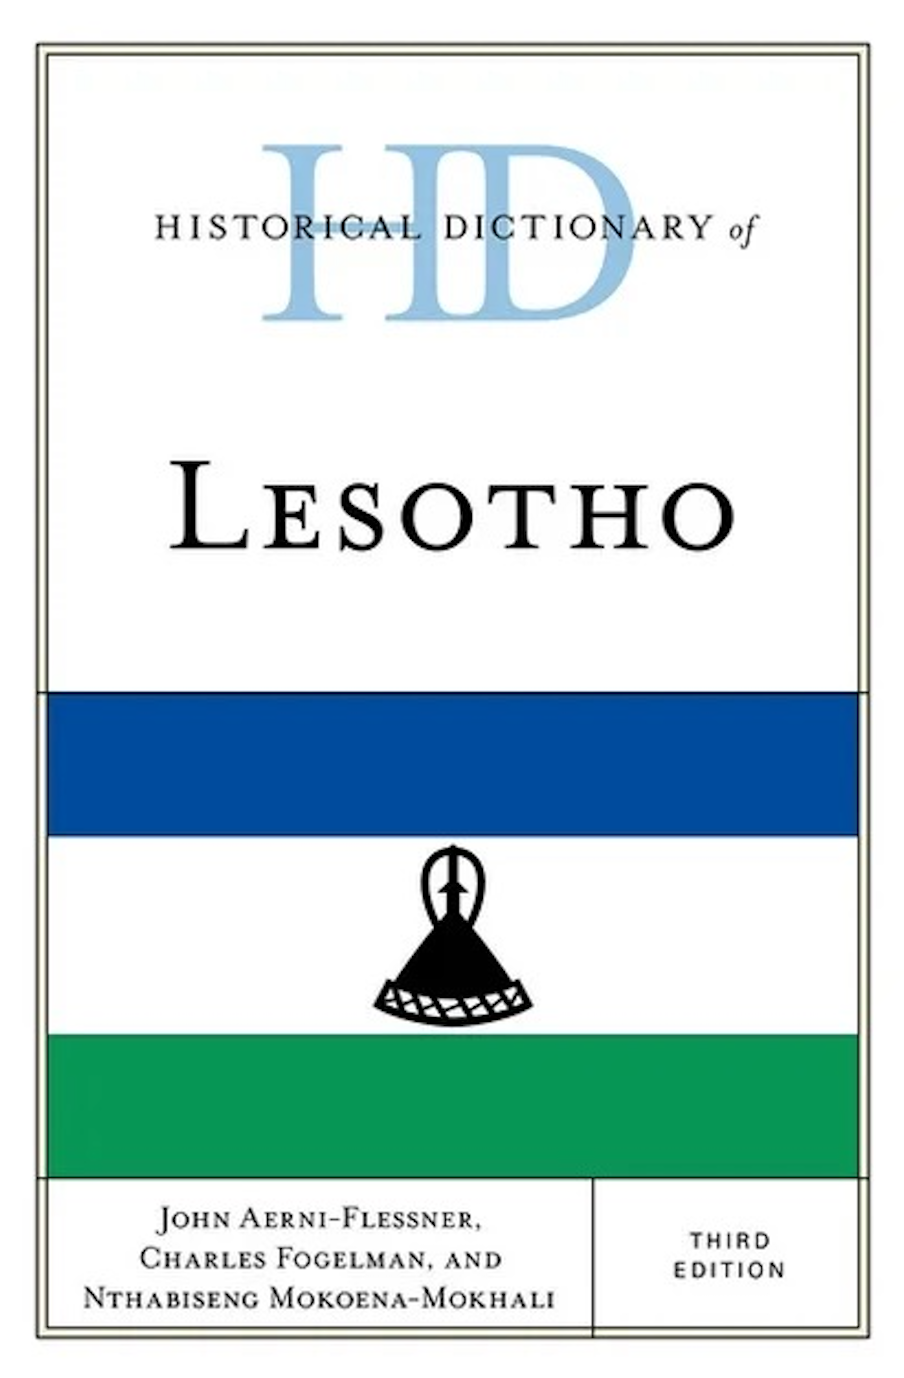 RCAH’s John Aerni-Flessner Co-Authors New Edition of Lesotho Historical Dictionary